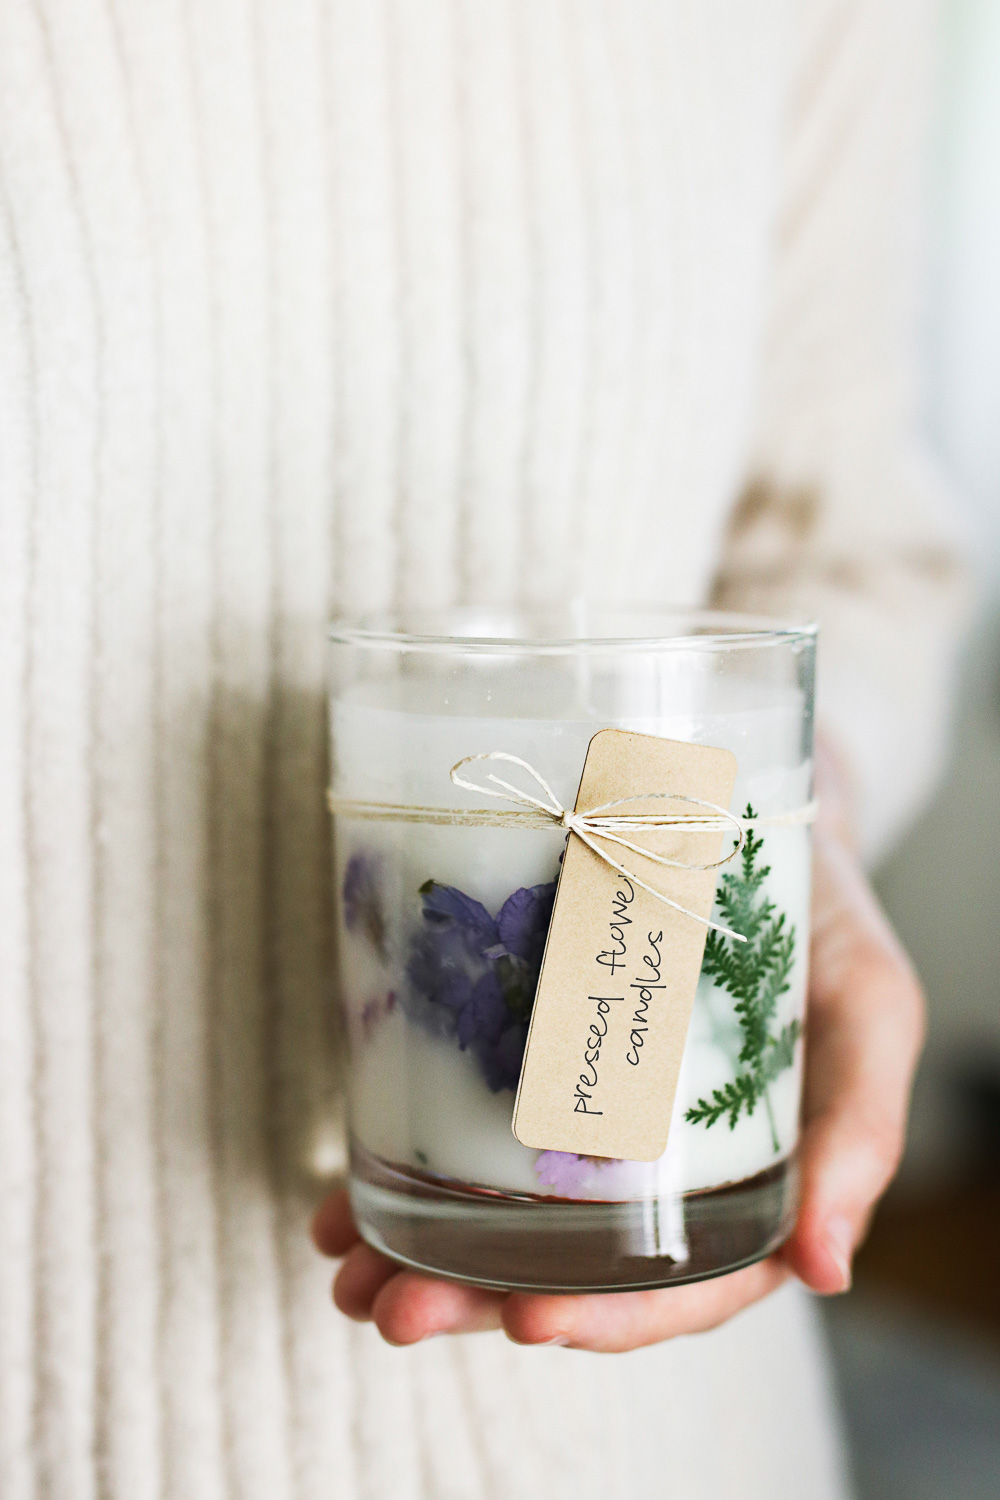 These gorgeous and gift-able dried flower candles bring a little of the outdoors in and will help tide you over during the cooler months ahead.